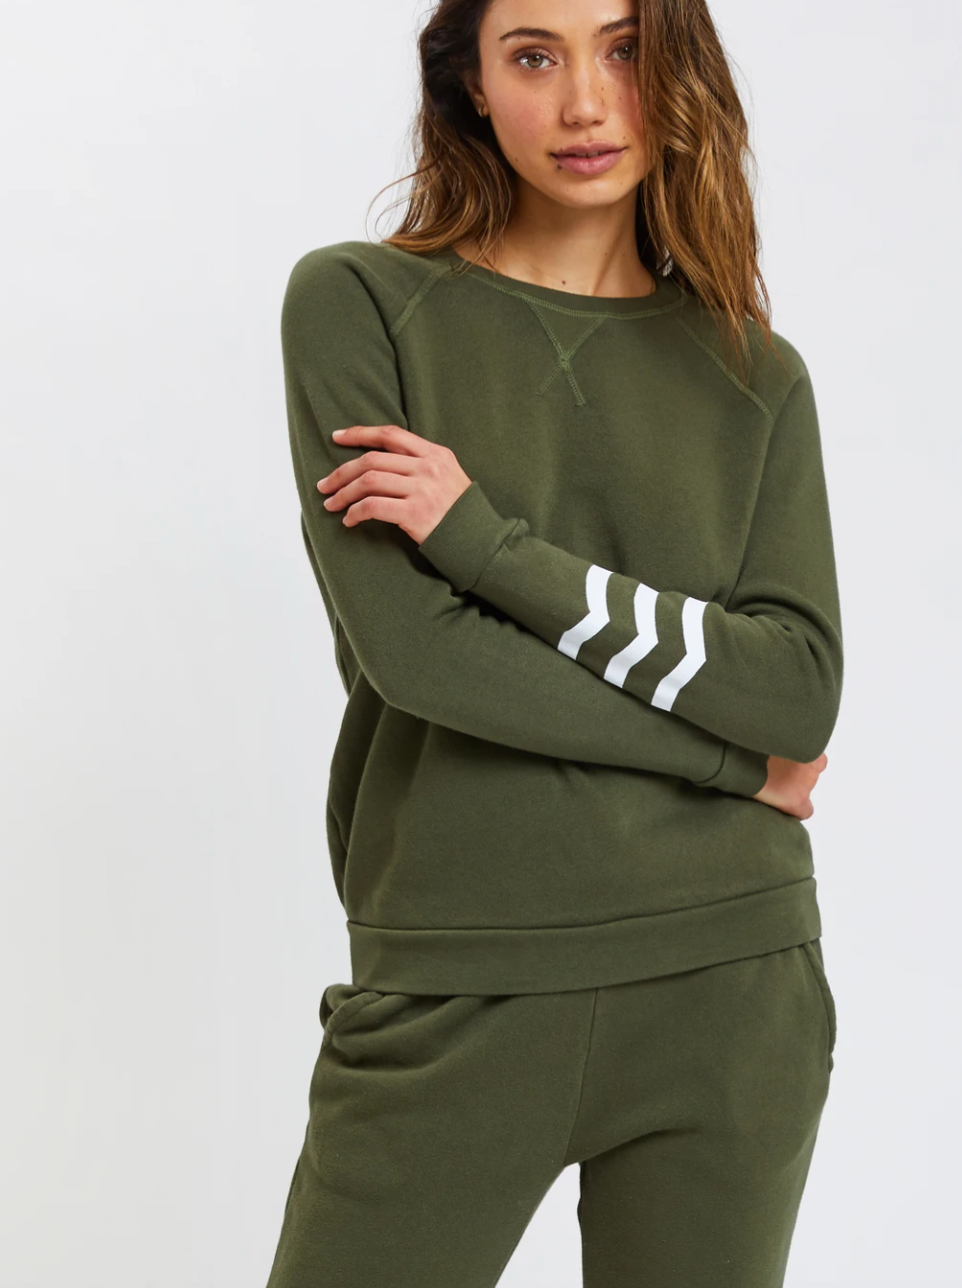 Sol Angeles Waves Essential Coastal Pullover in Olive